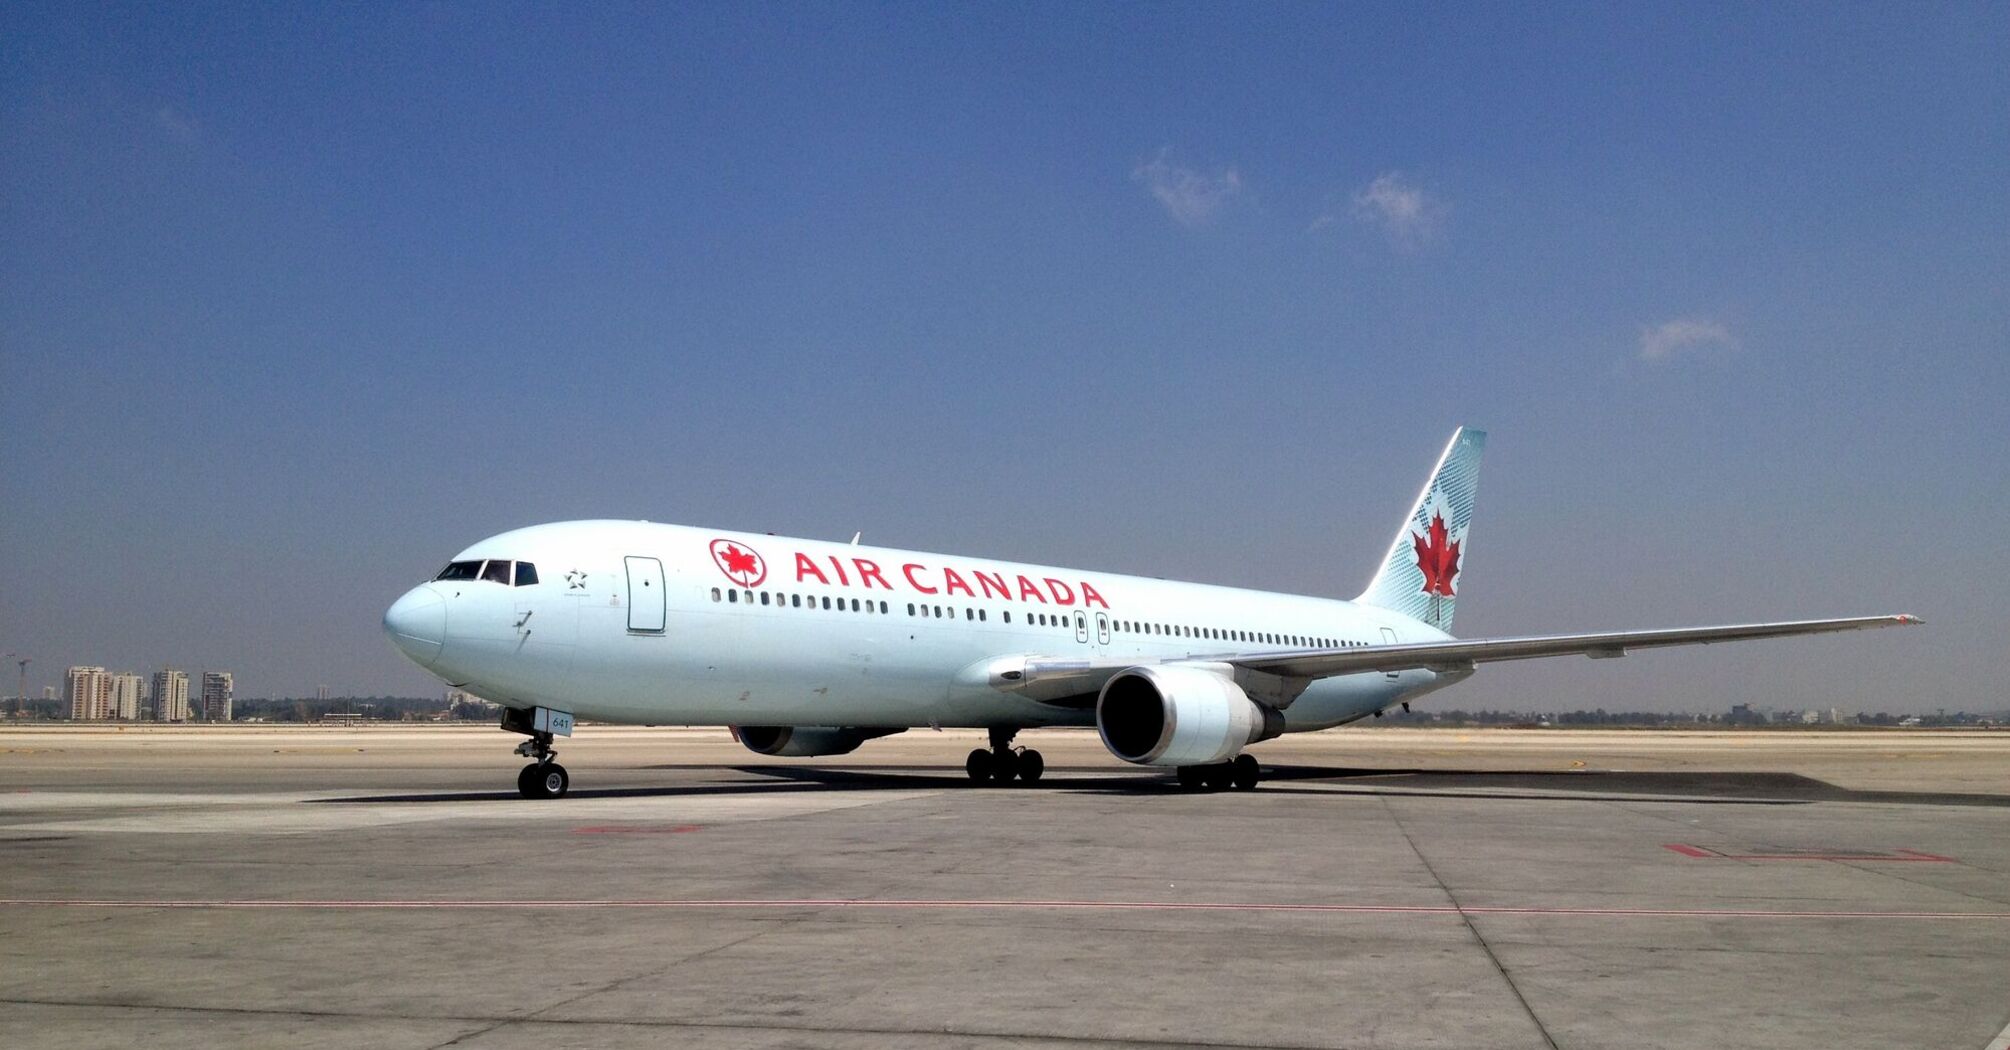 Passengers of Air Canada will be able to track their luggage in a special application